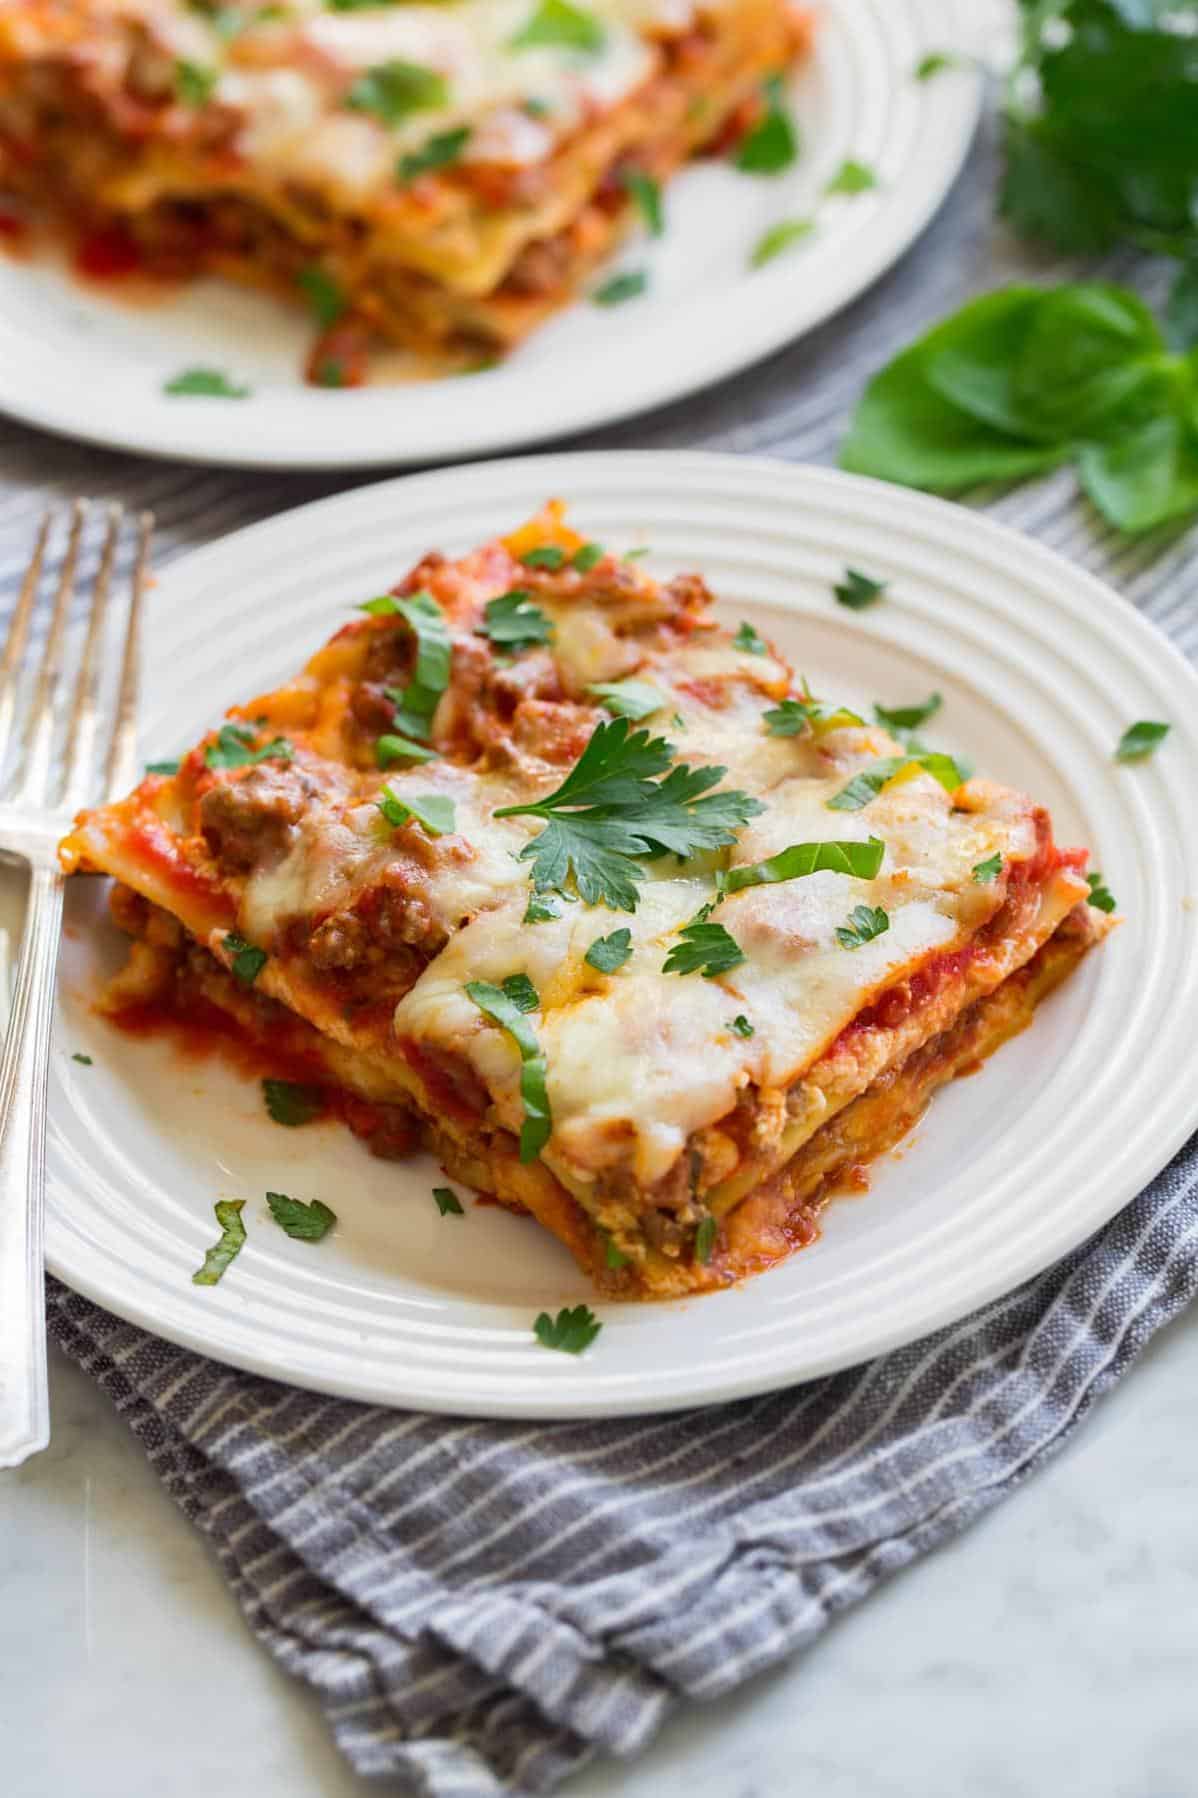  Make it a pasta night with our flavorful lasagna.